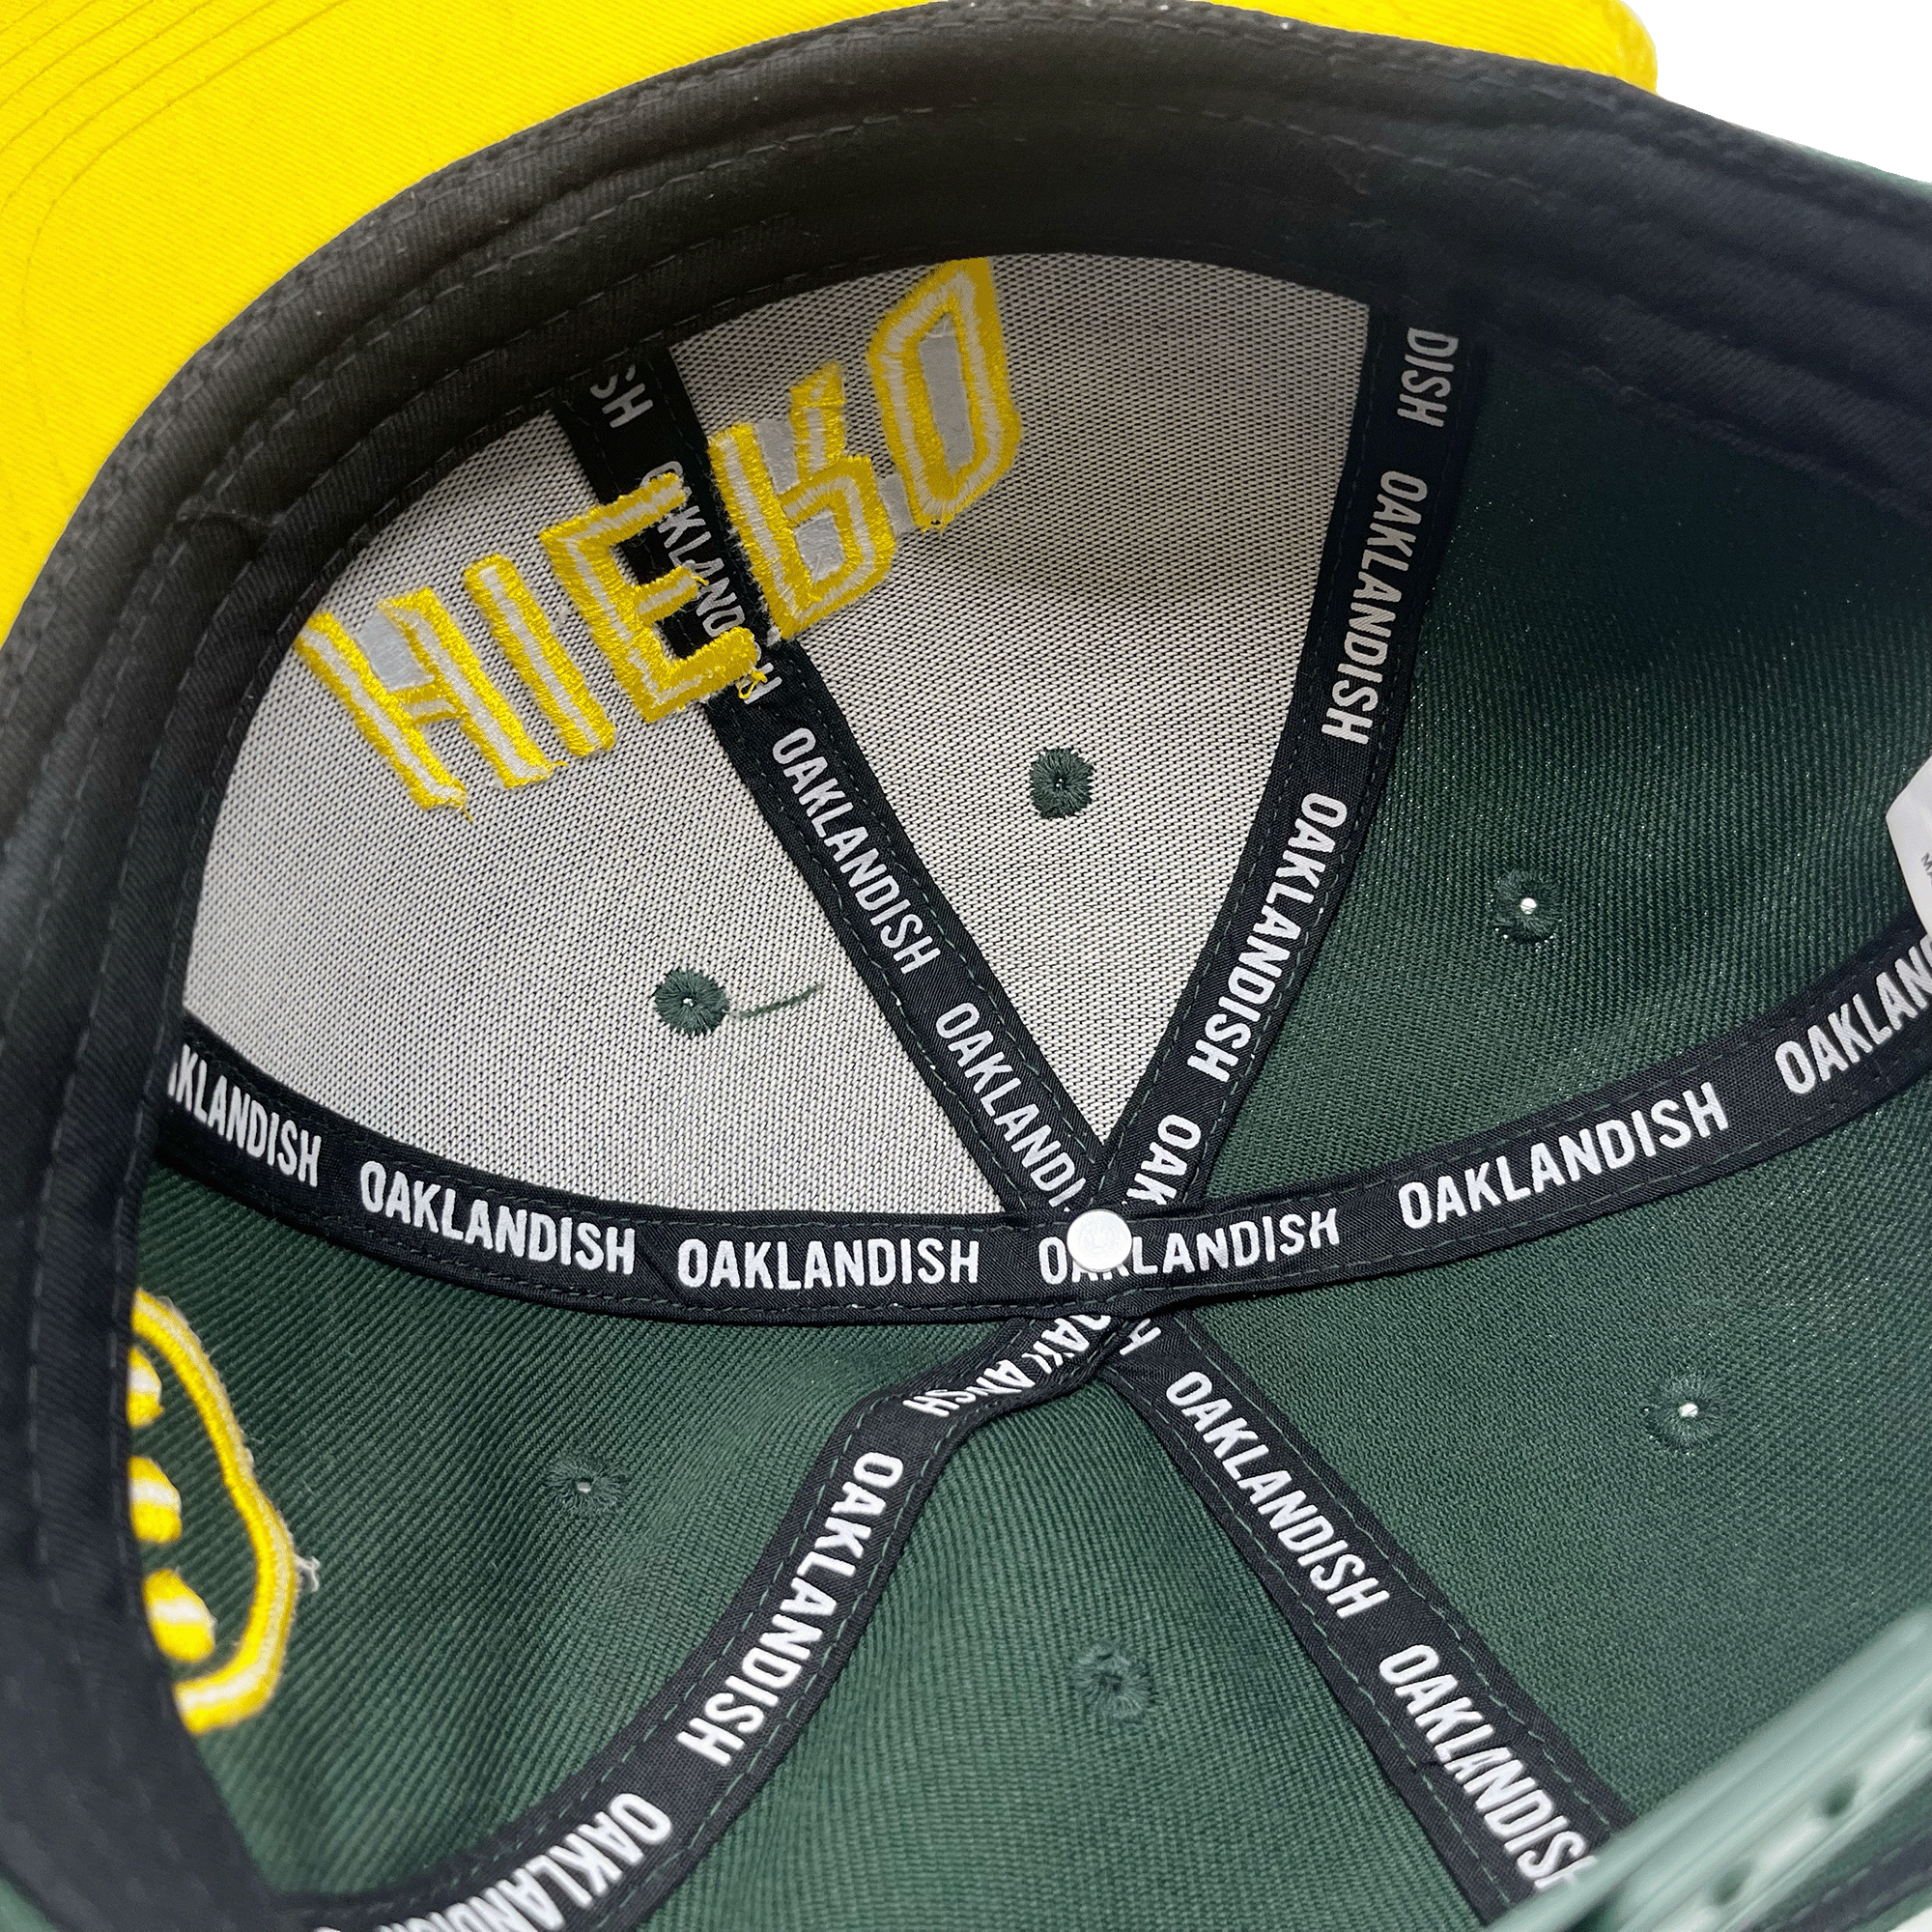 Inside view of the crown of a cap with OAKLANDISH taping inside the crown.